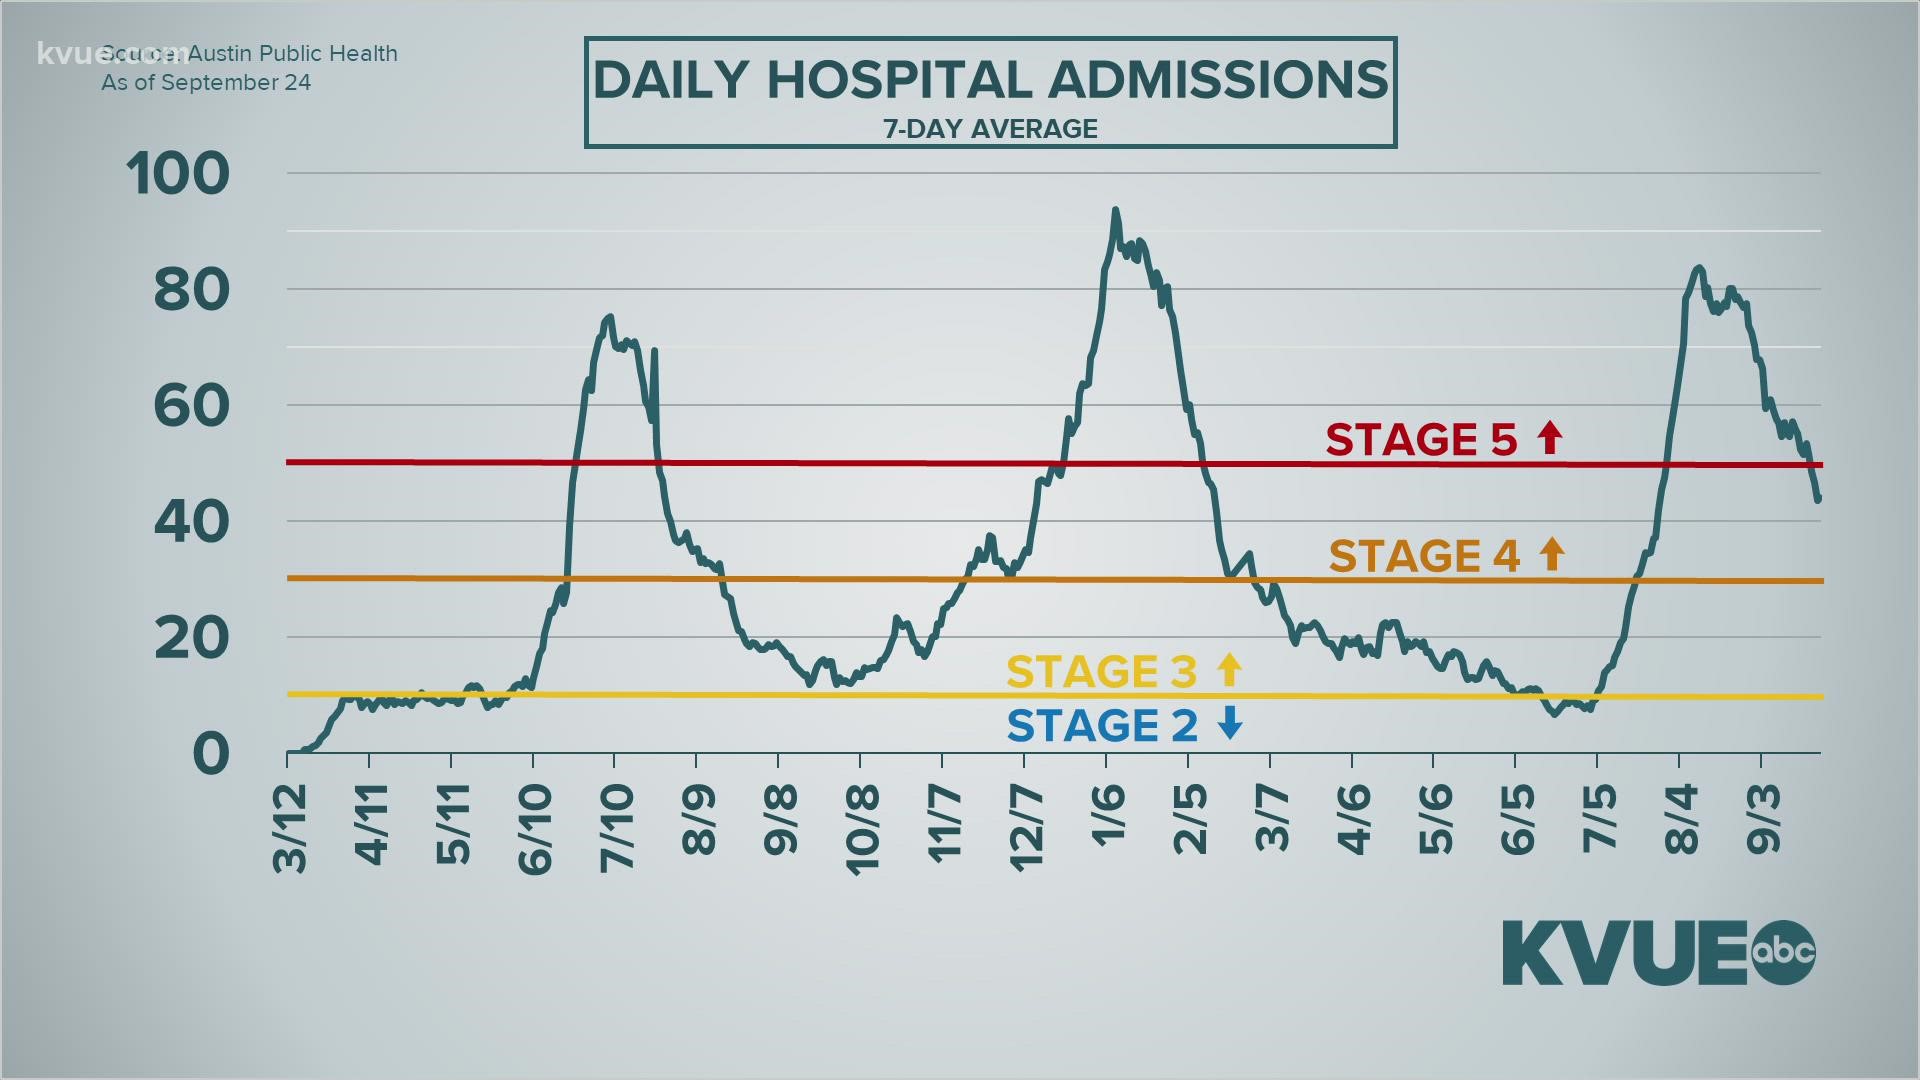 Locally, COVID-19 cases and hospitalizations are still falling as we near Stage 4 territory.